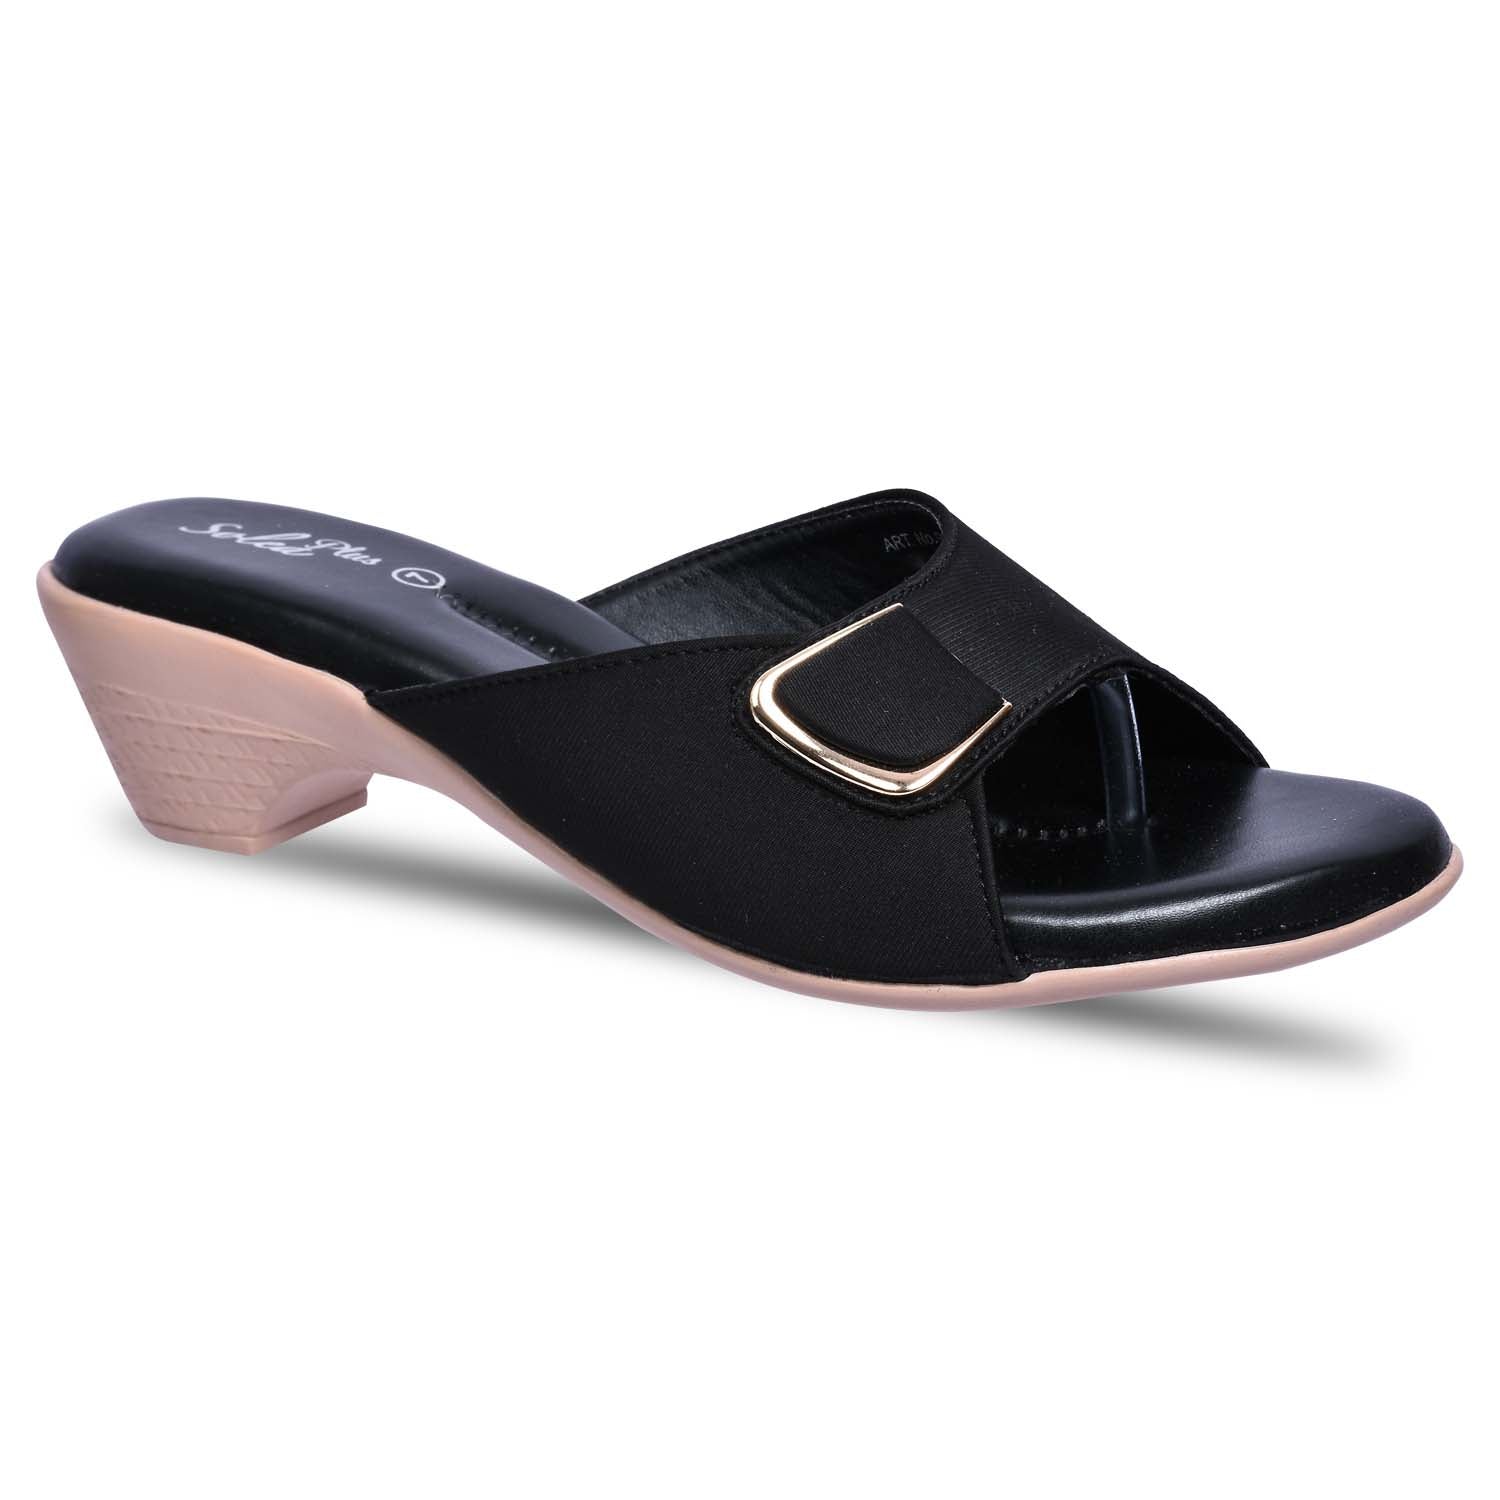 Paragon R1019L Women Sandals | Casual &amp; Formal Sandals | Stylish, Comfortable &amp; Durable | For Daily &amp; Occasion Wear